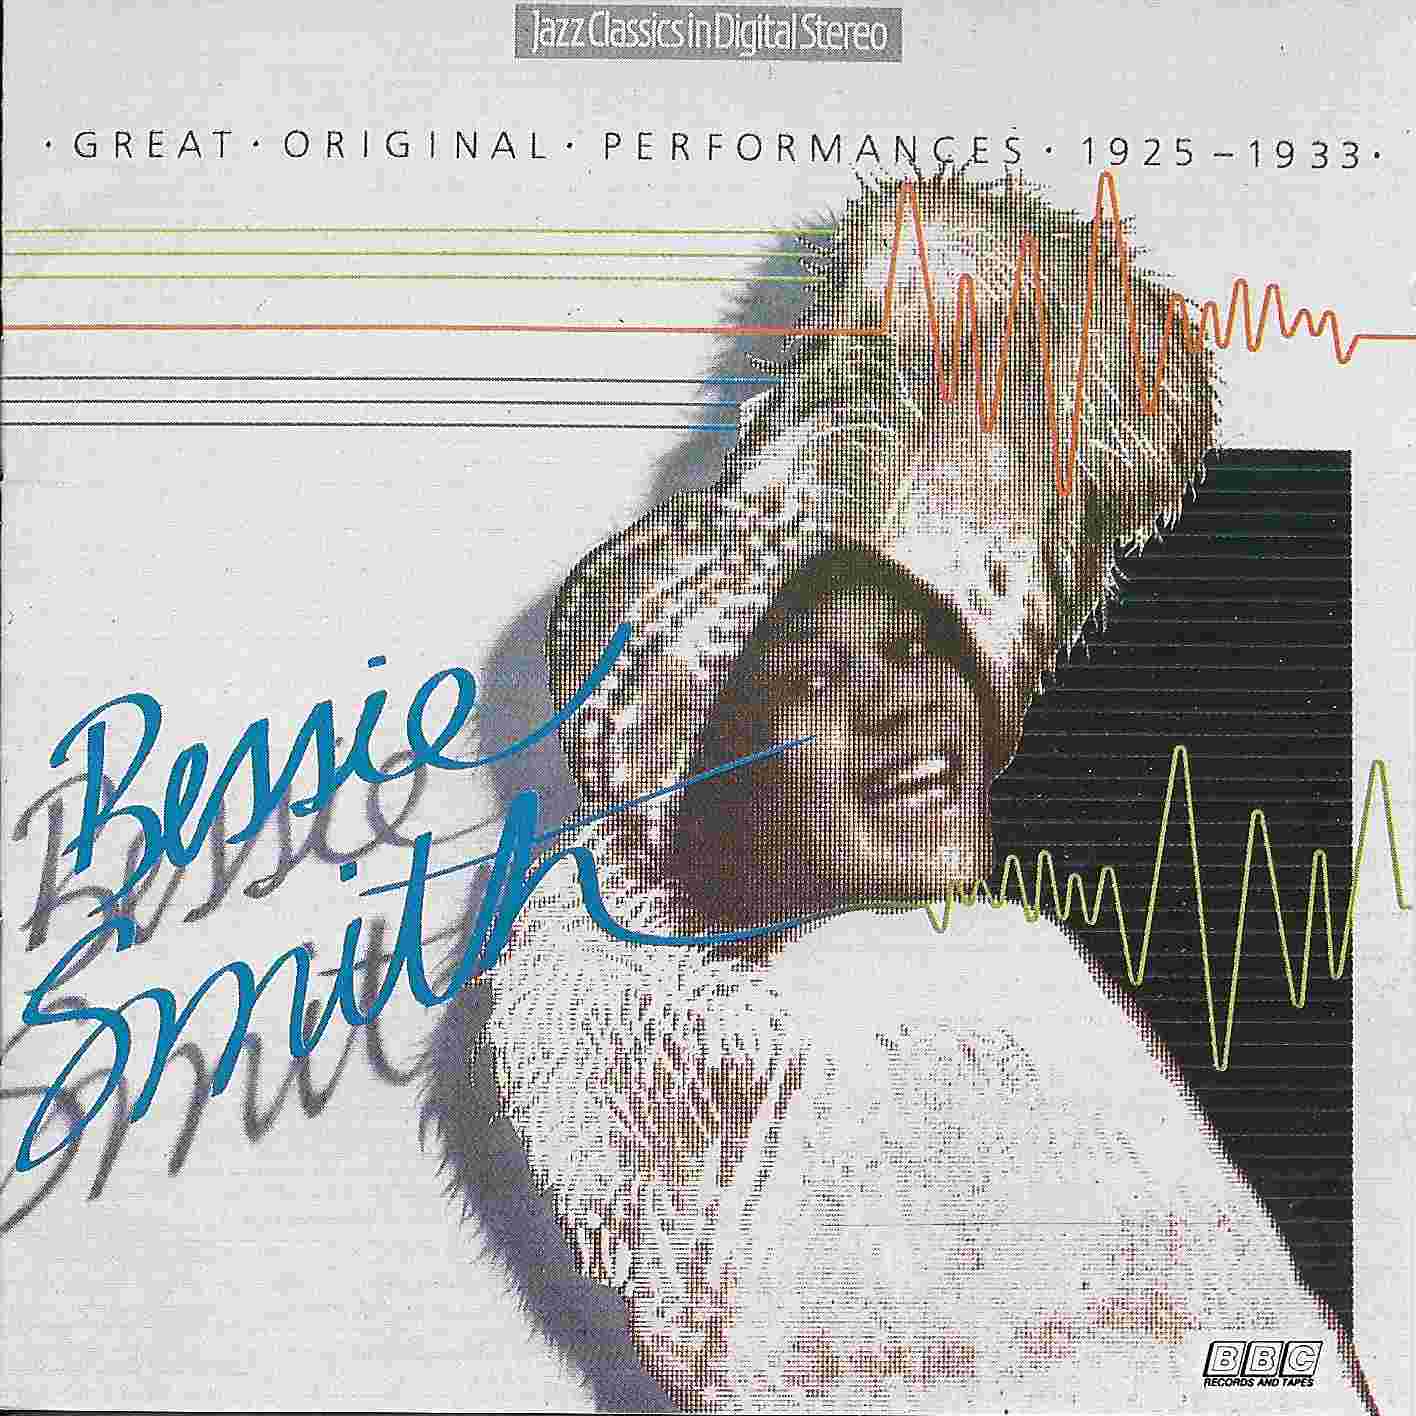 Picture of BBCCD602 Jazz Classics - Bessie Smith by artist Bessie Smith from the BBC cds - Records and Tapes library